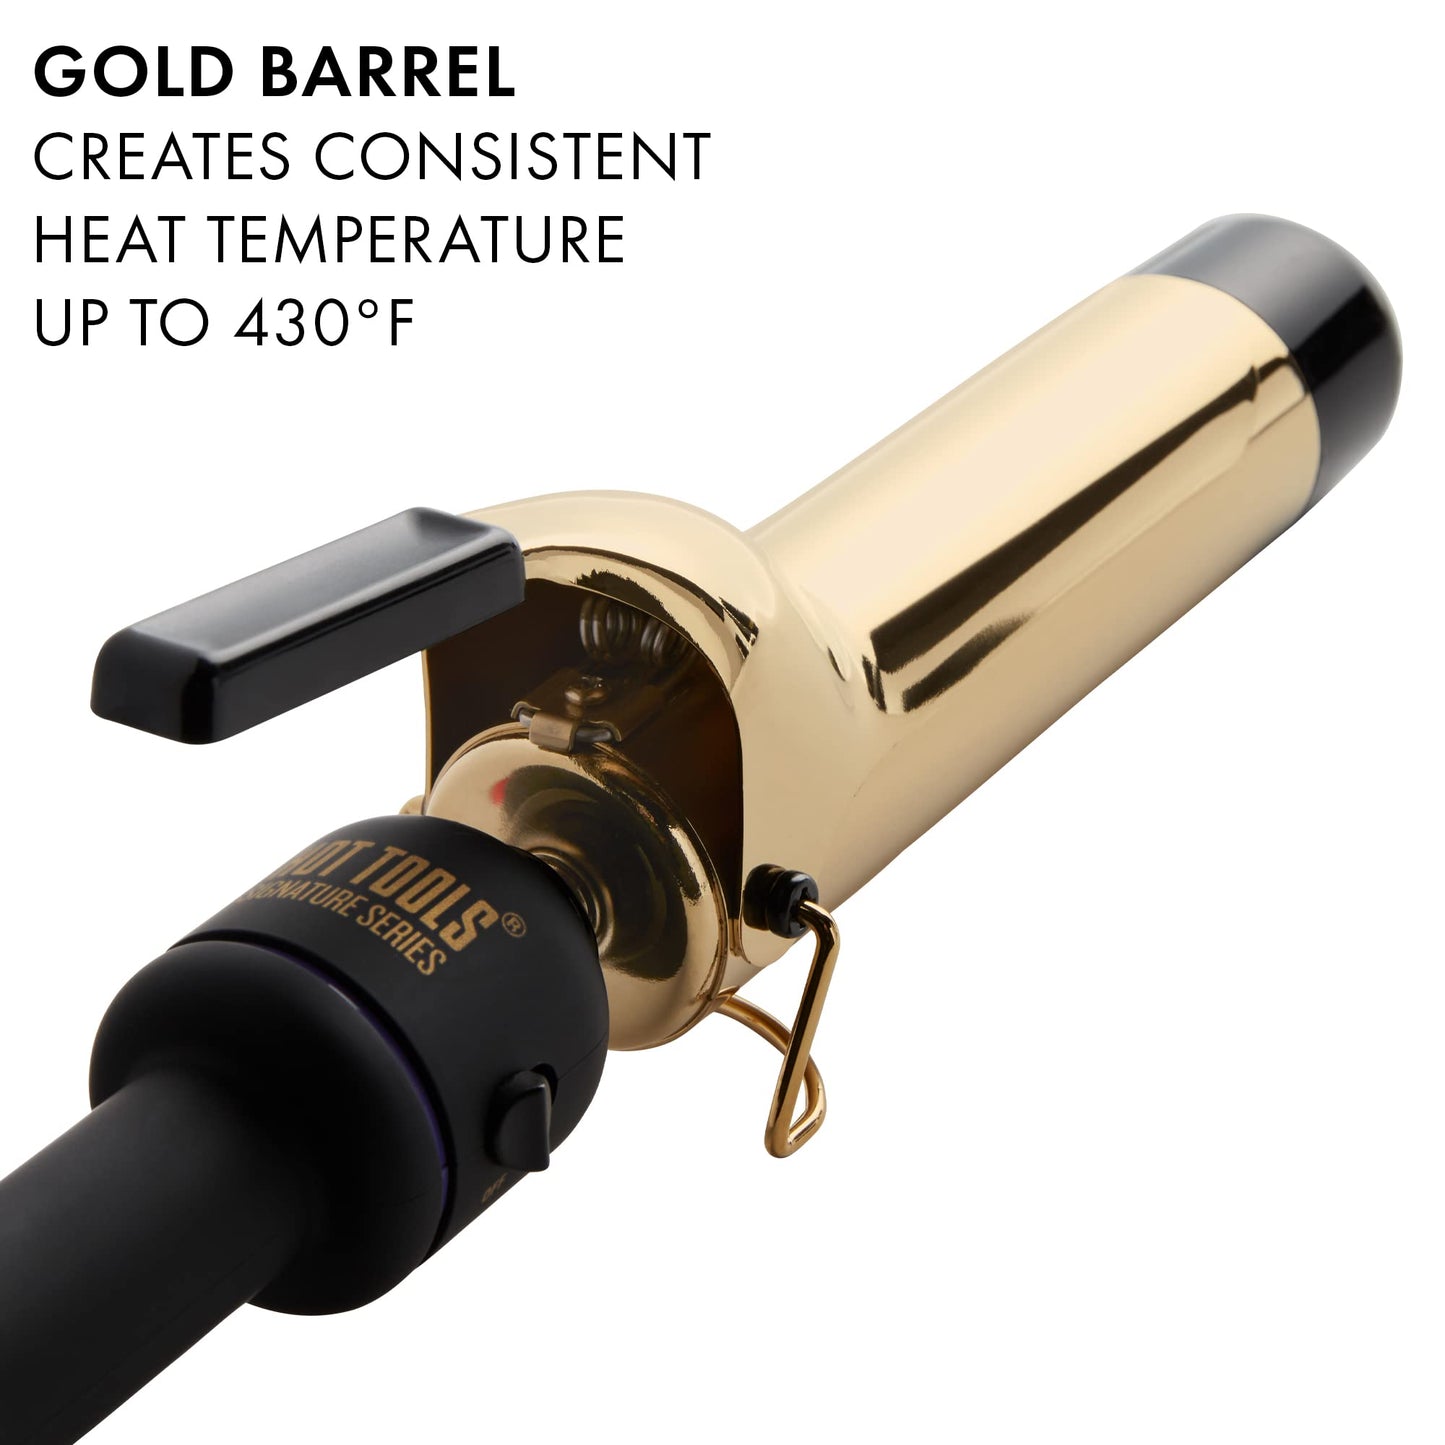 HOT TOOLS Pro Signature Gold Curling Iron | Long-Lasting, Defined Curls, (1-1/2 in)